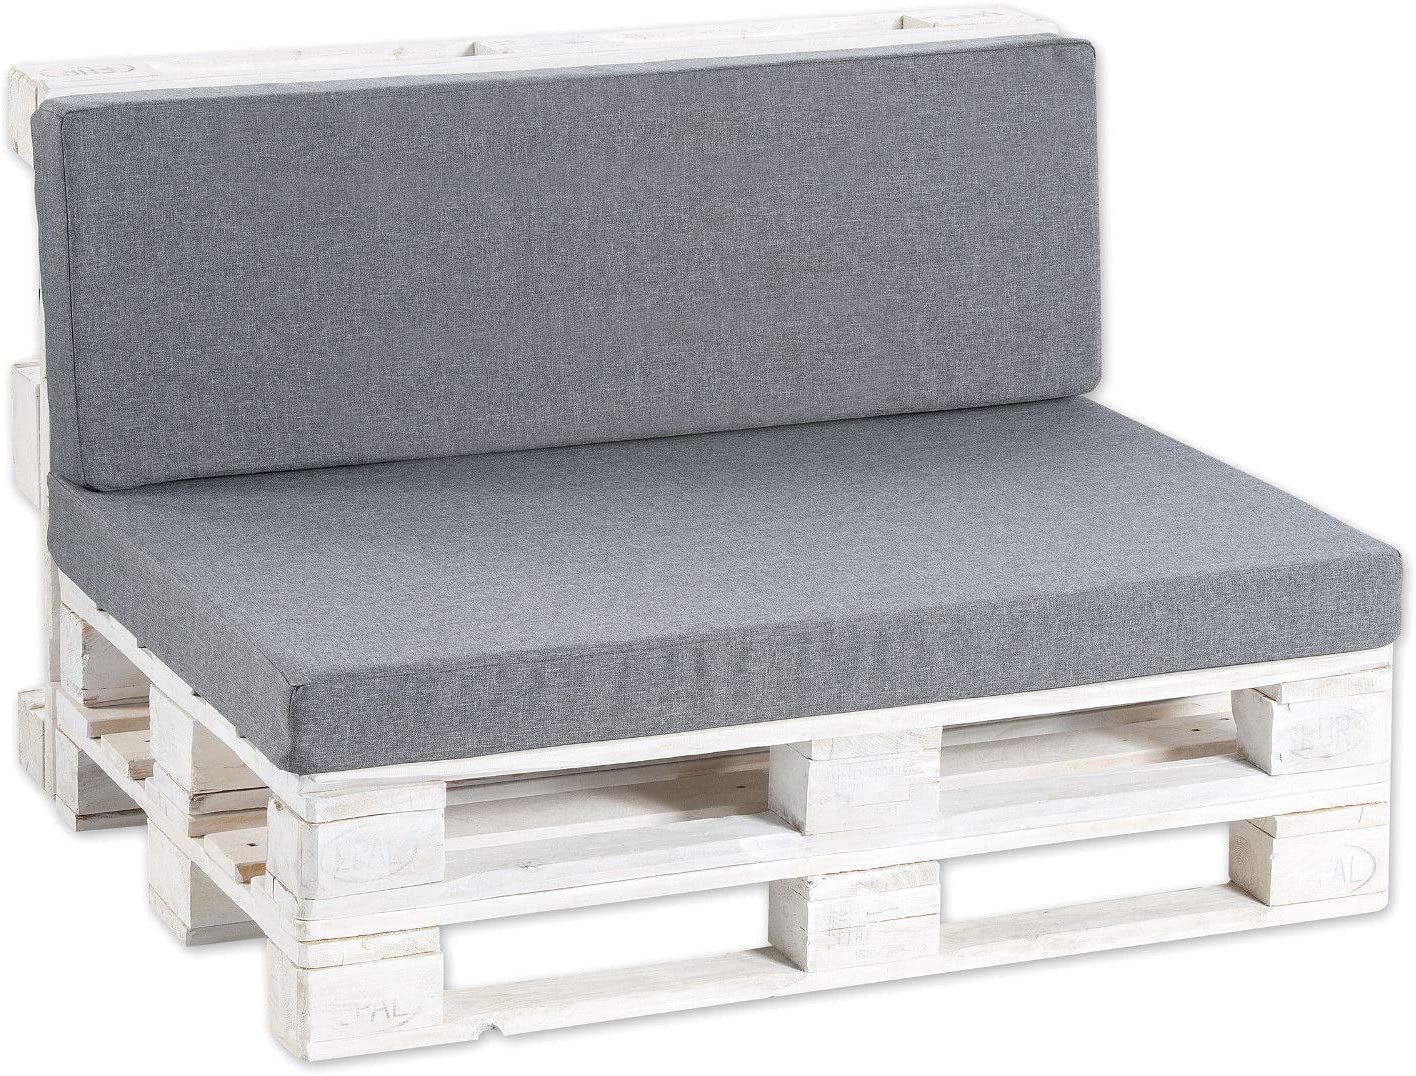 Pallet Cushion Set (Seat Cushion + Backrest) / 120 x 80 cm and 120 x 40 cm / Faux Leather / Smooth, charcoal